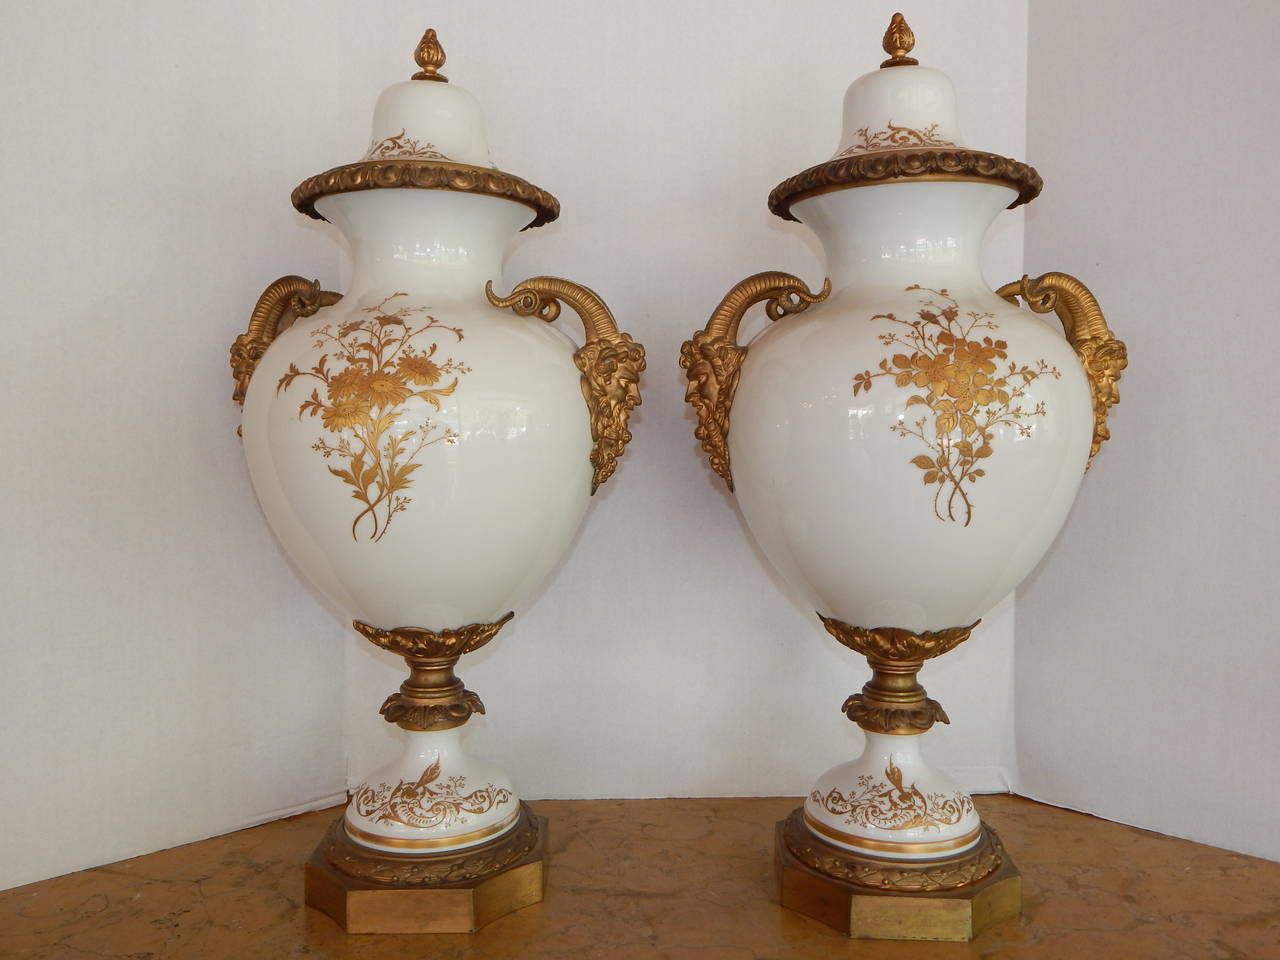 A beautifully painted pair of Sevres bronze mounted covered vases, on a cream white ground, with Bacchus handles, artist signed.